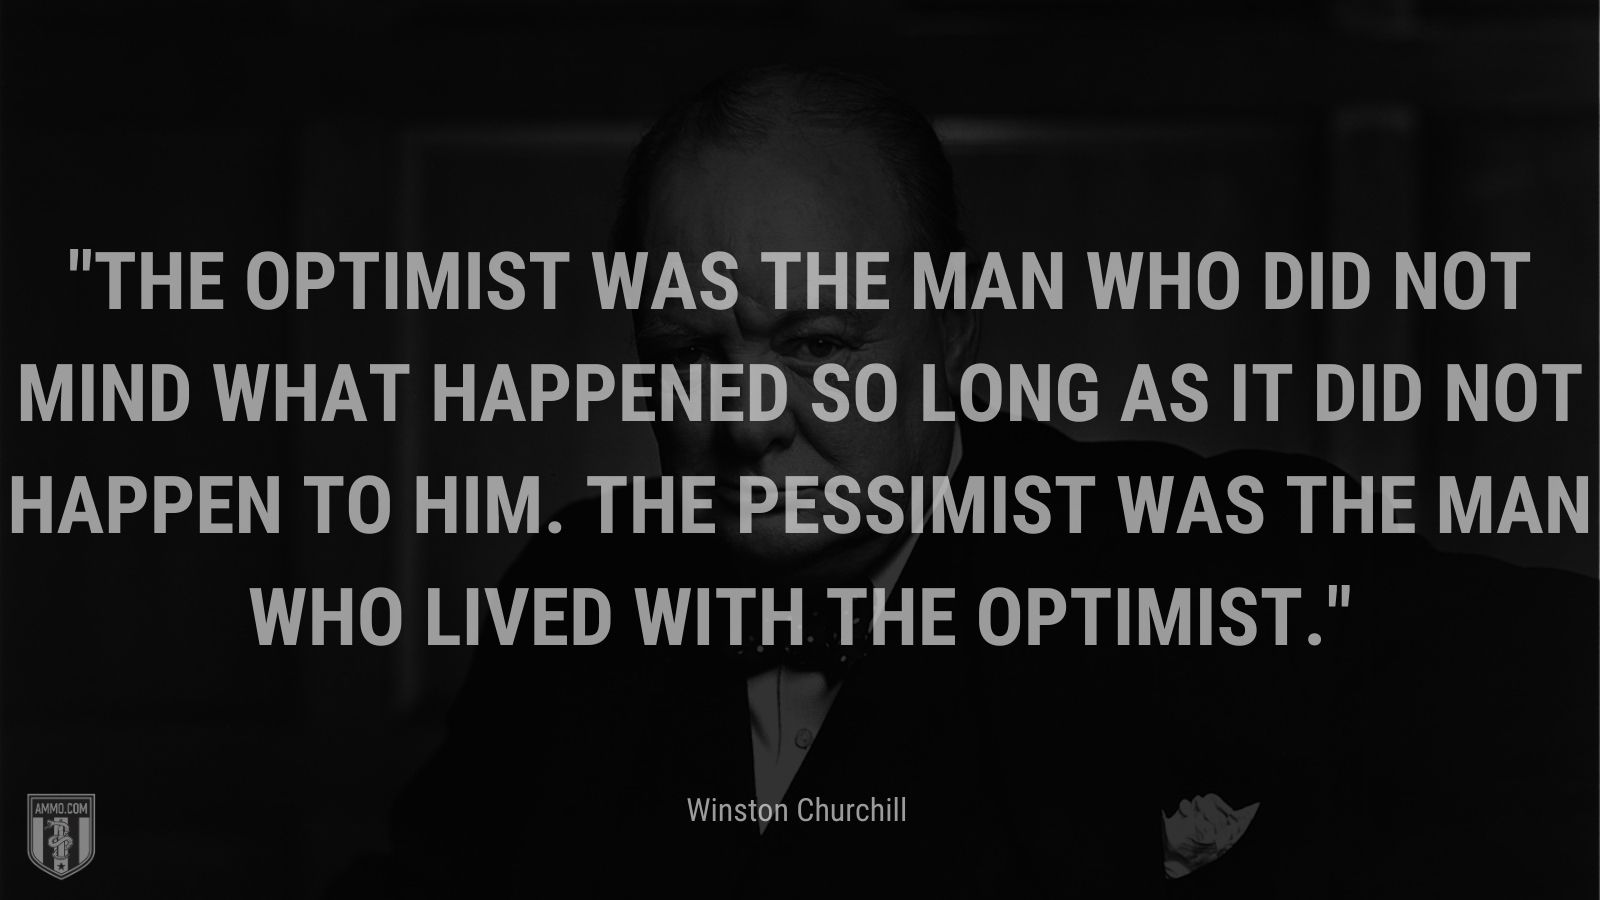 The optimist was the man who did not mind what happened so long as it did not happen to him. The pessimist was the man who lived with the optimist.